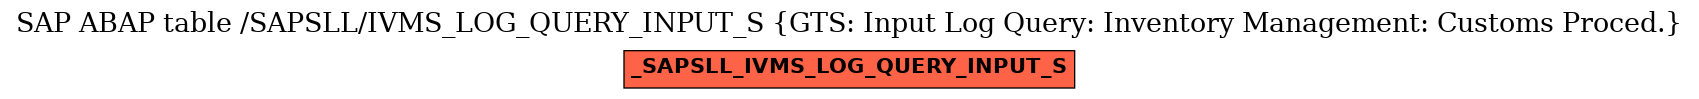 E-R Diagram for table /SAPSLL/IVMS_LOG_QUERY_INPUT_S (GTS: Input Log Query: Inventory Management: Customs Proced.)